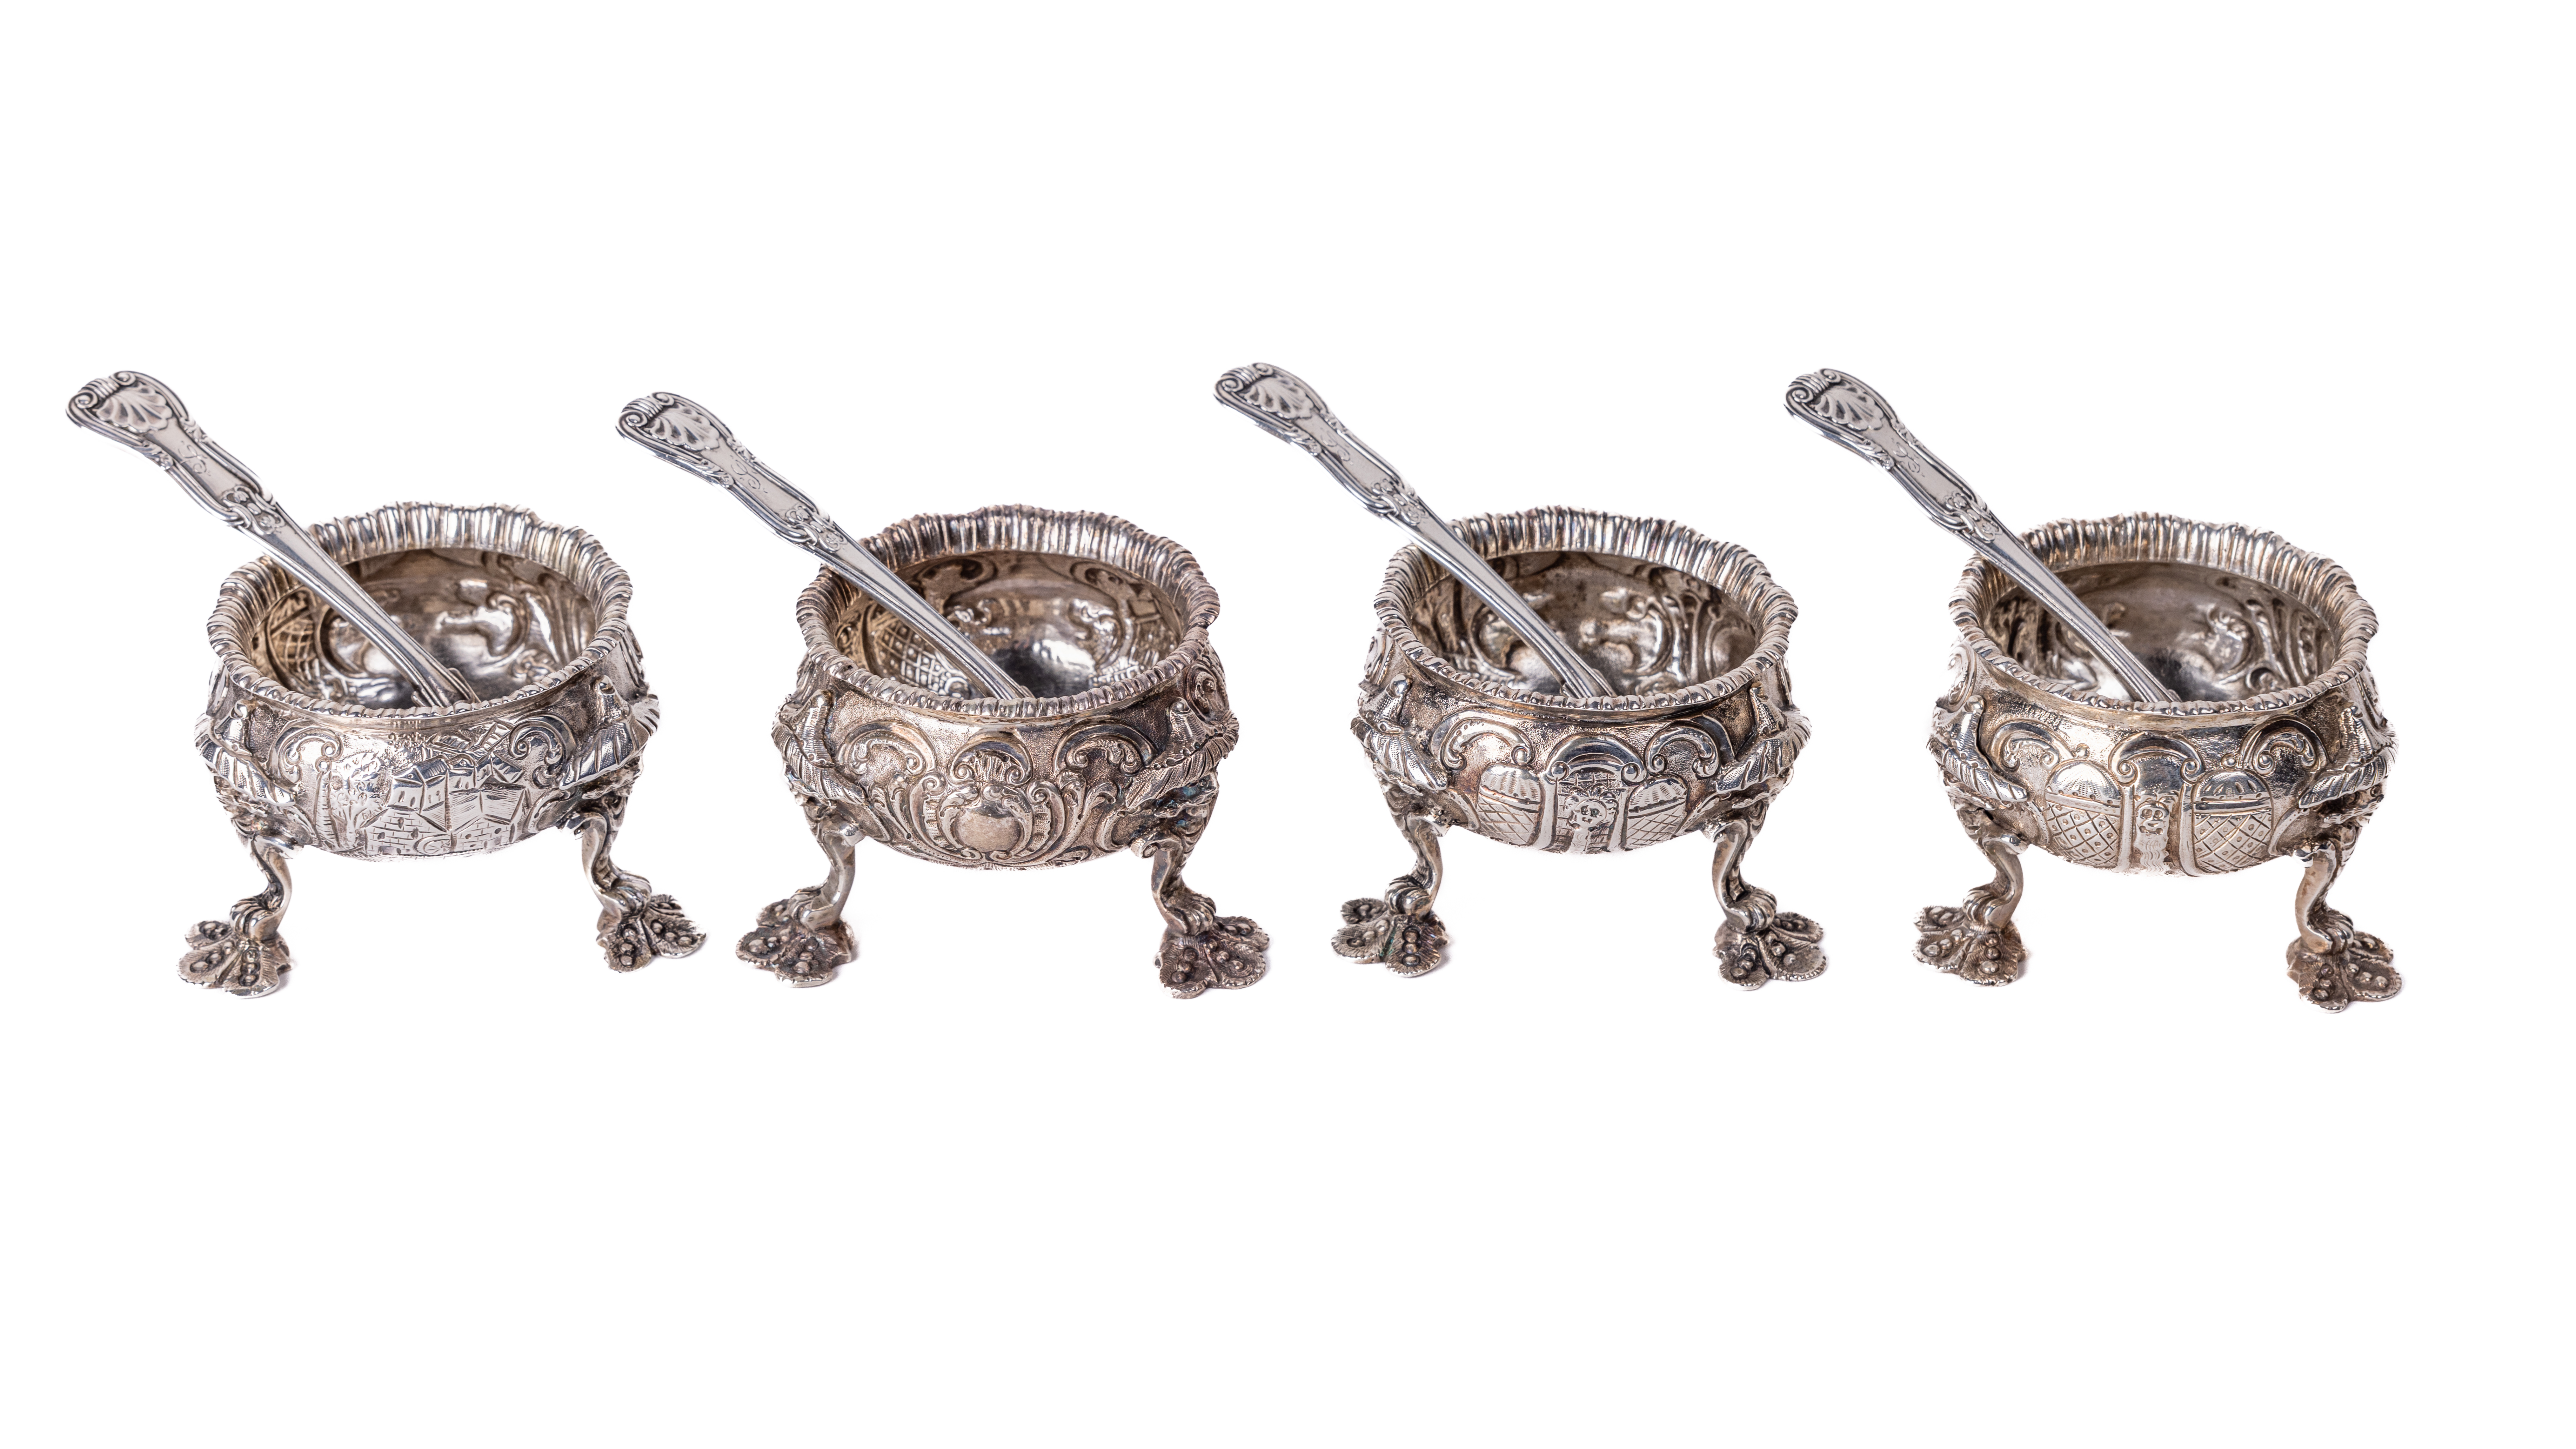 A fine quality set of Irish silver Salts, by James Fray, Dublin c. 1825, the edges of reeded form